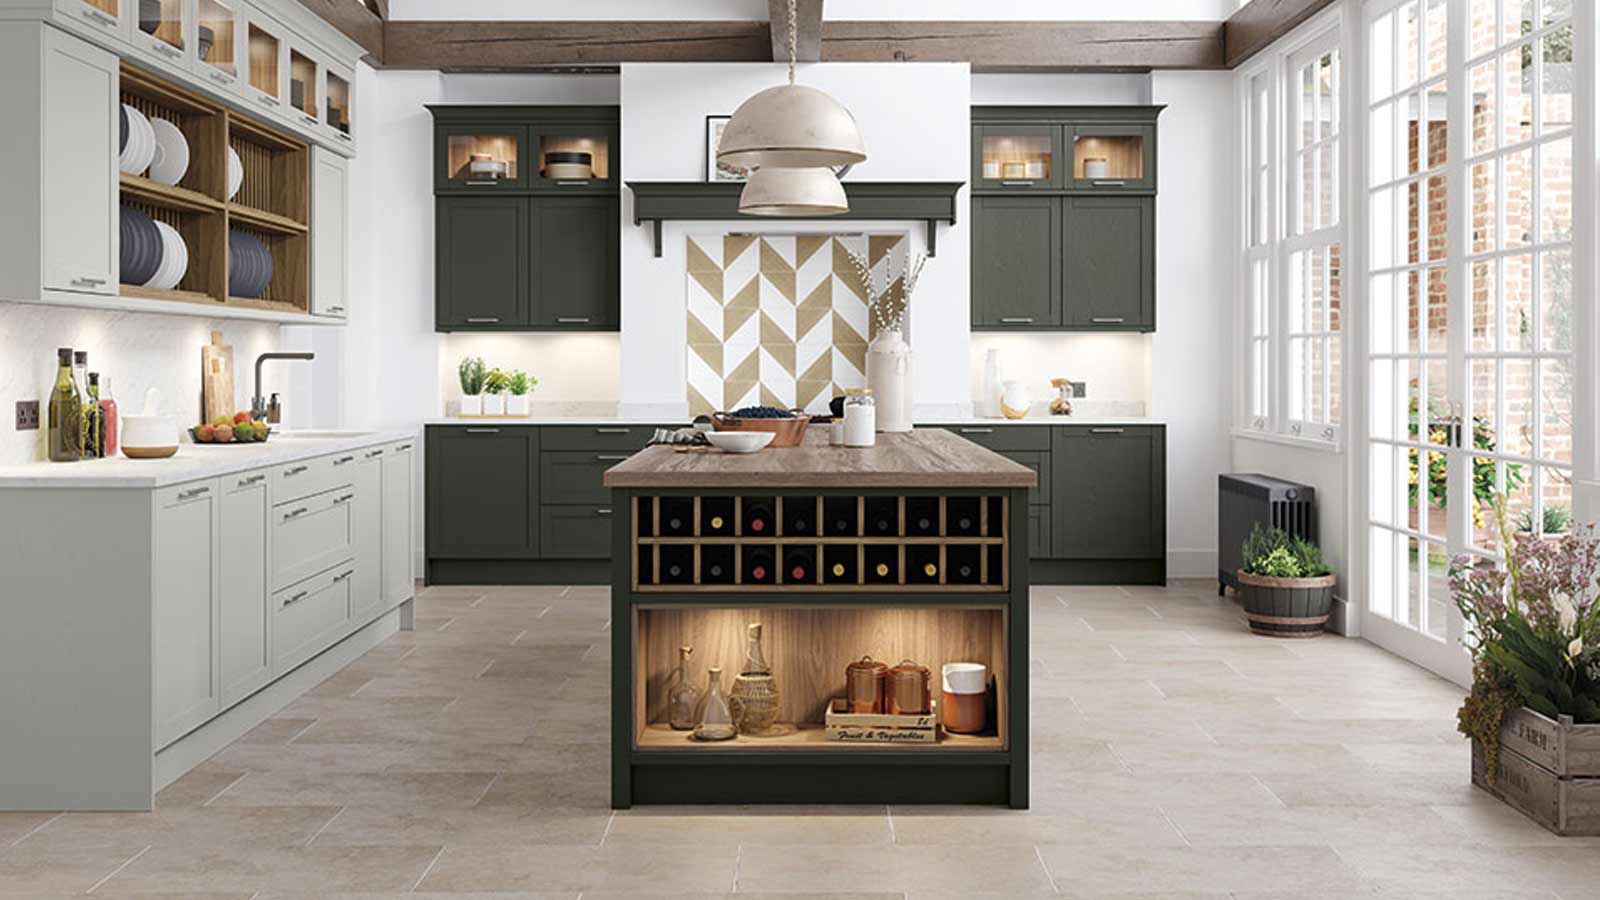 Spacious Shaker kitchen with island and Italian décor